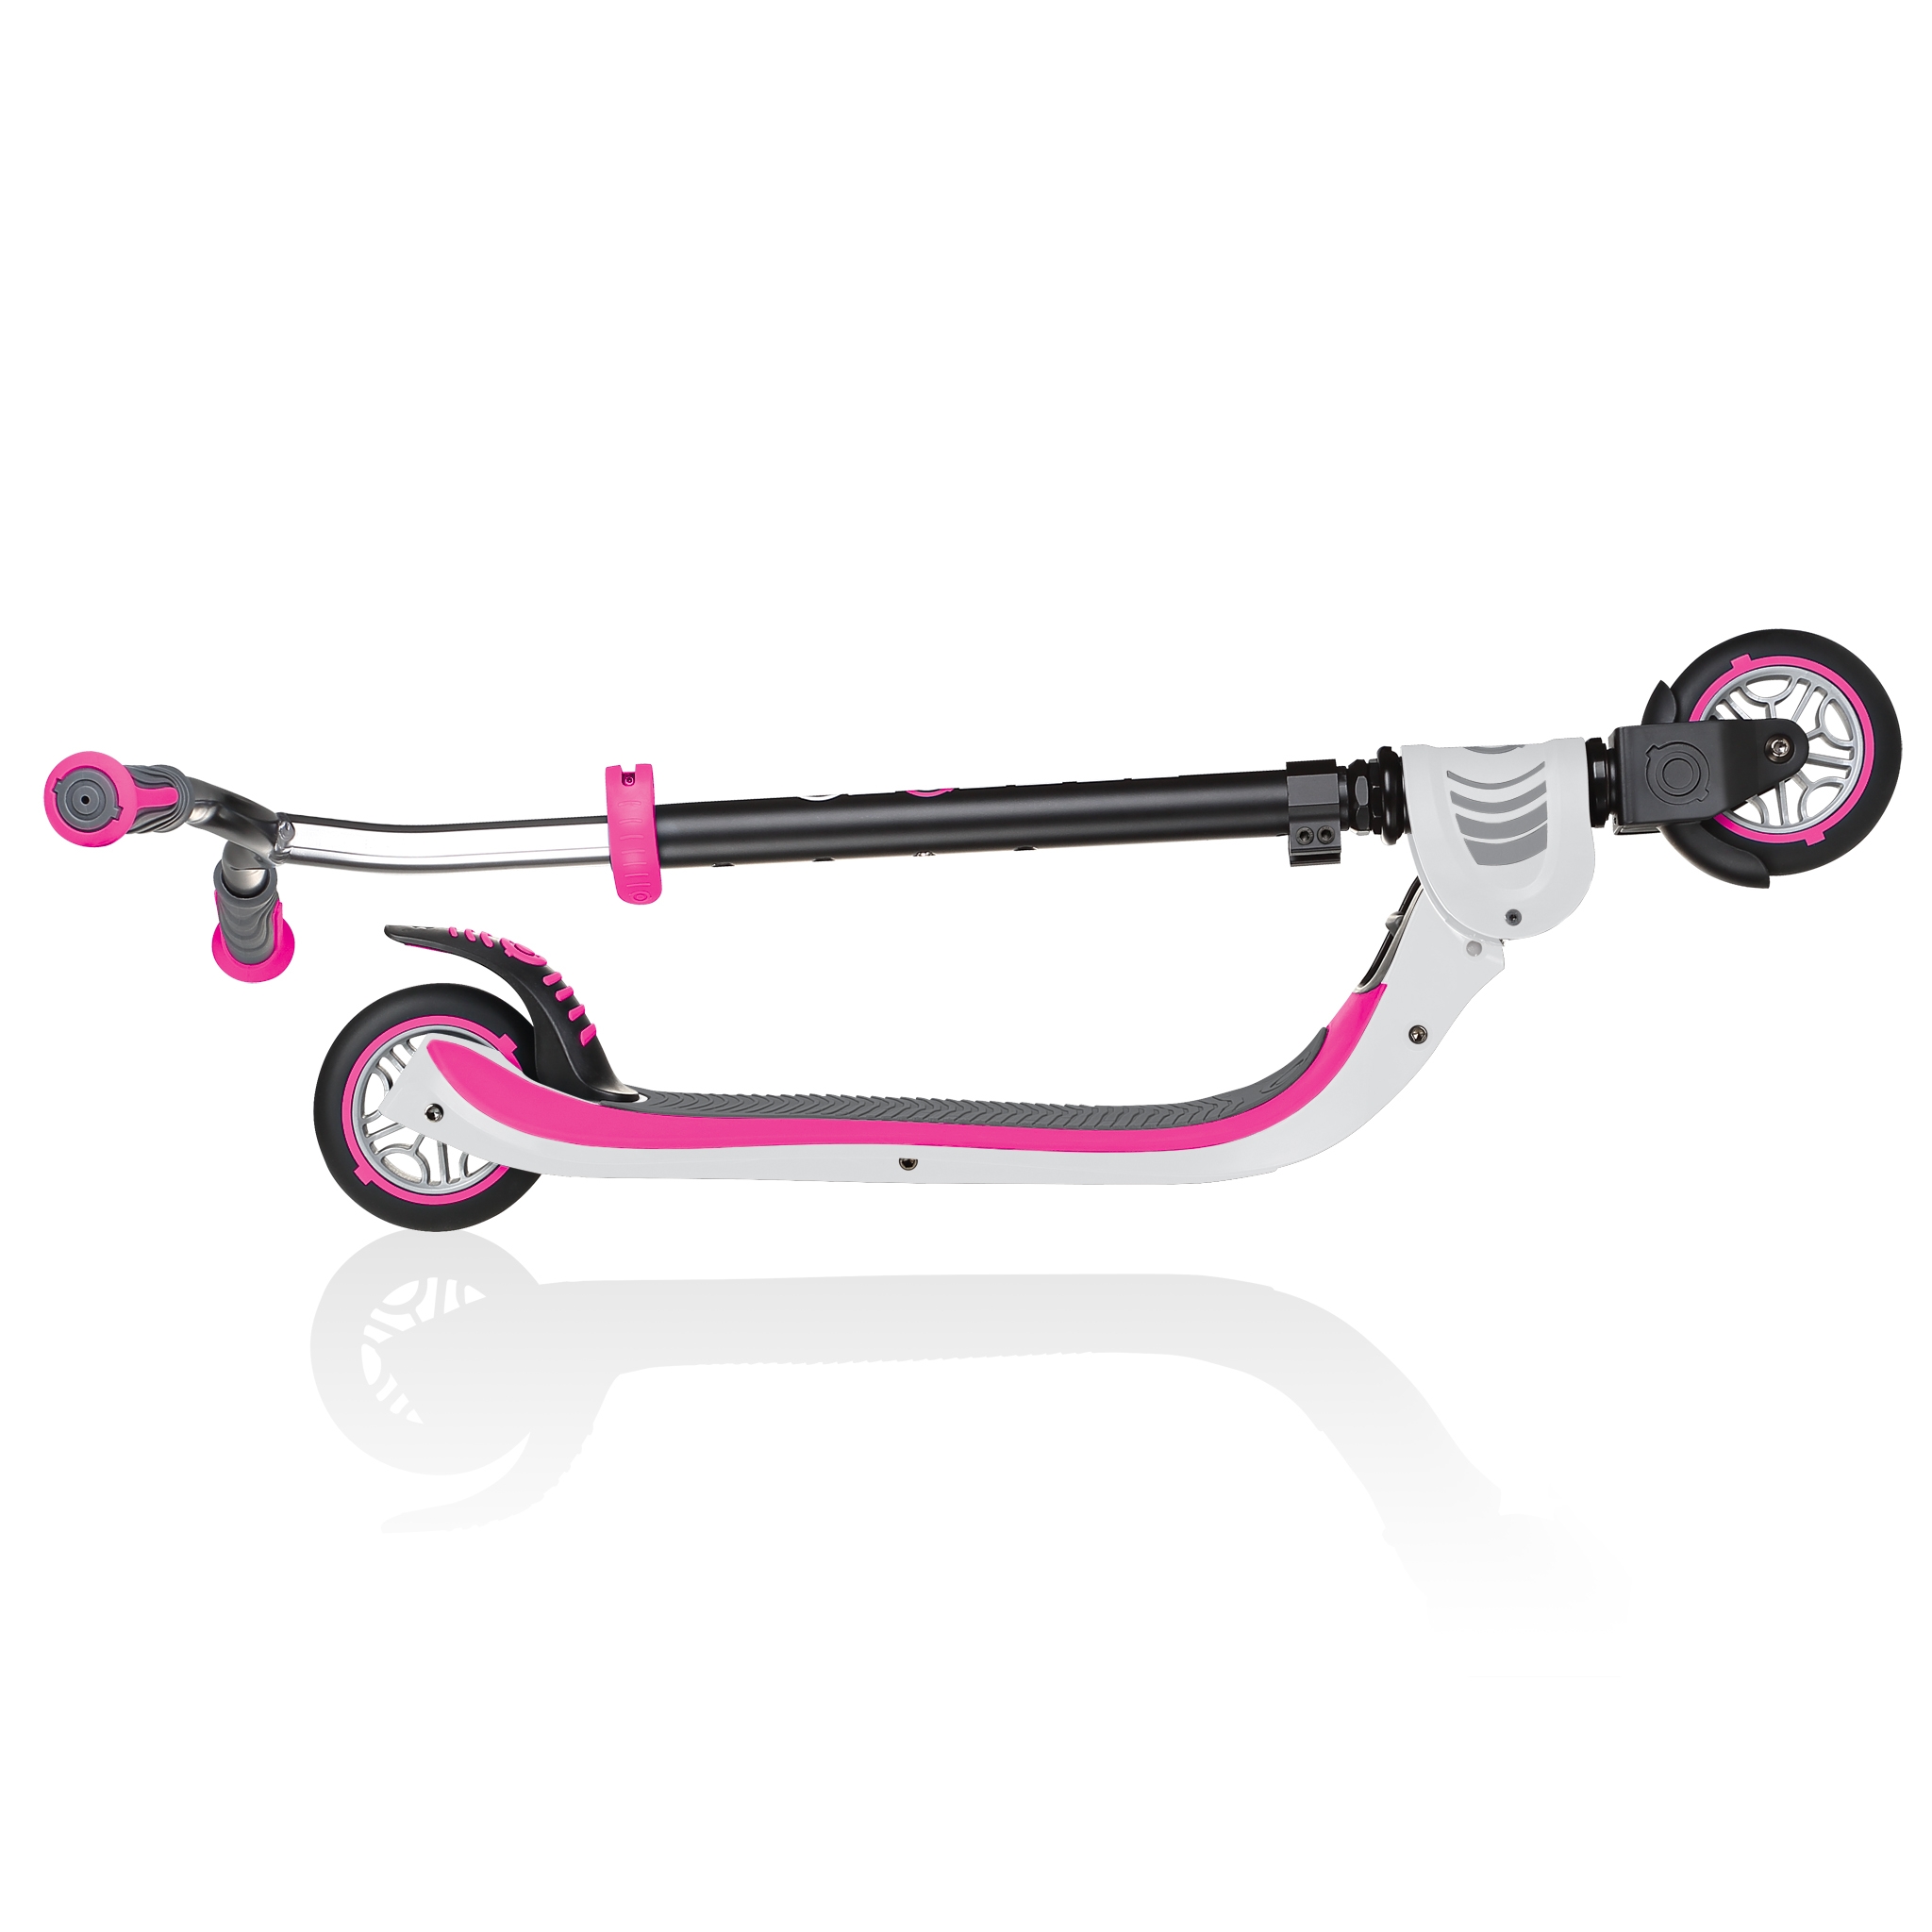 FLOW-FOLDABLE-125-2-wheel-foldable-scooter-for-kids 1